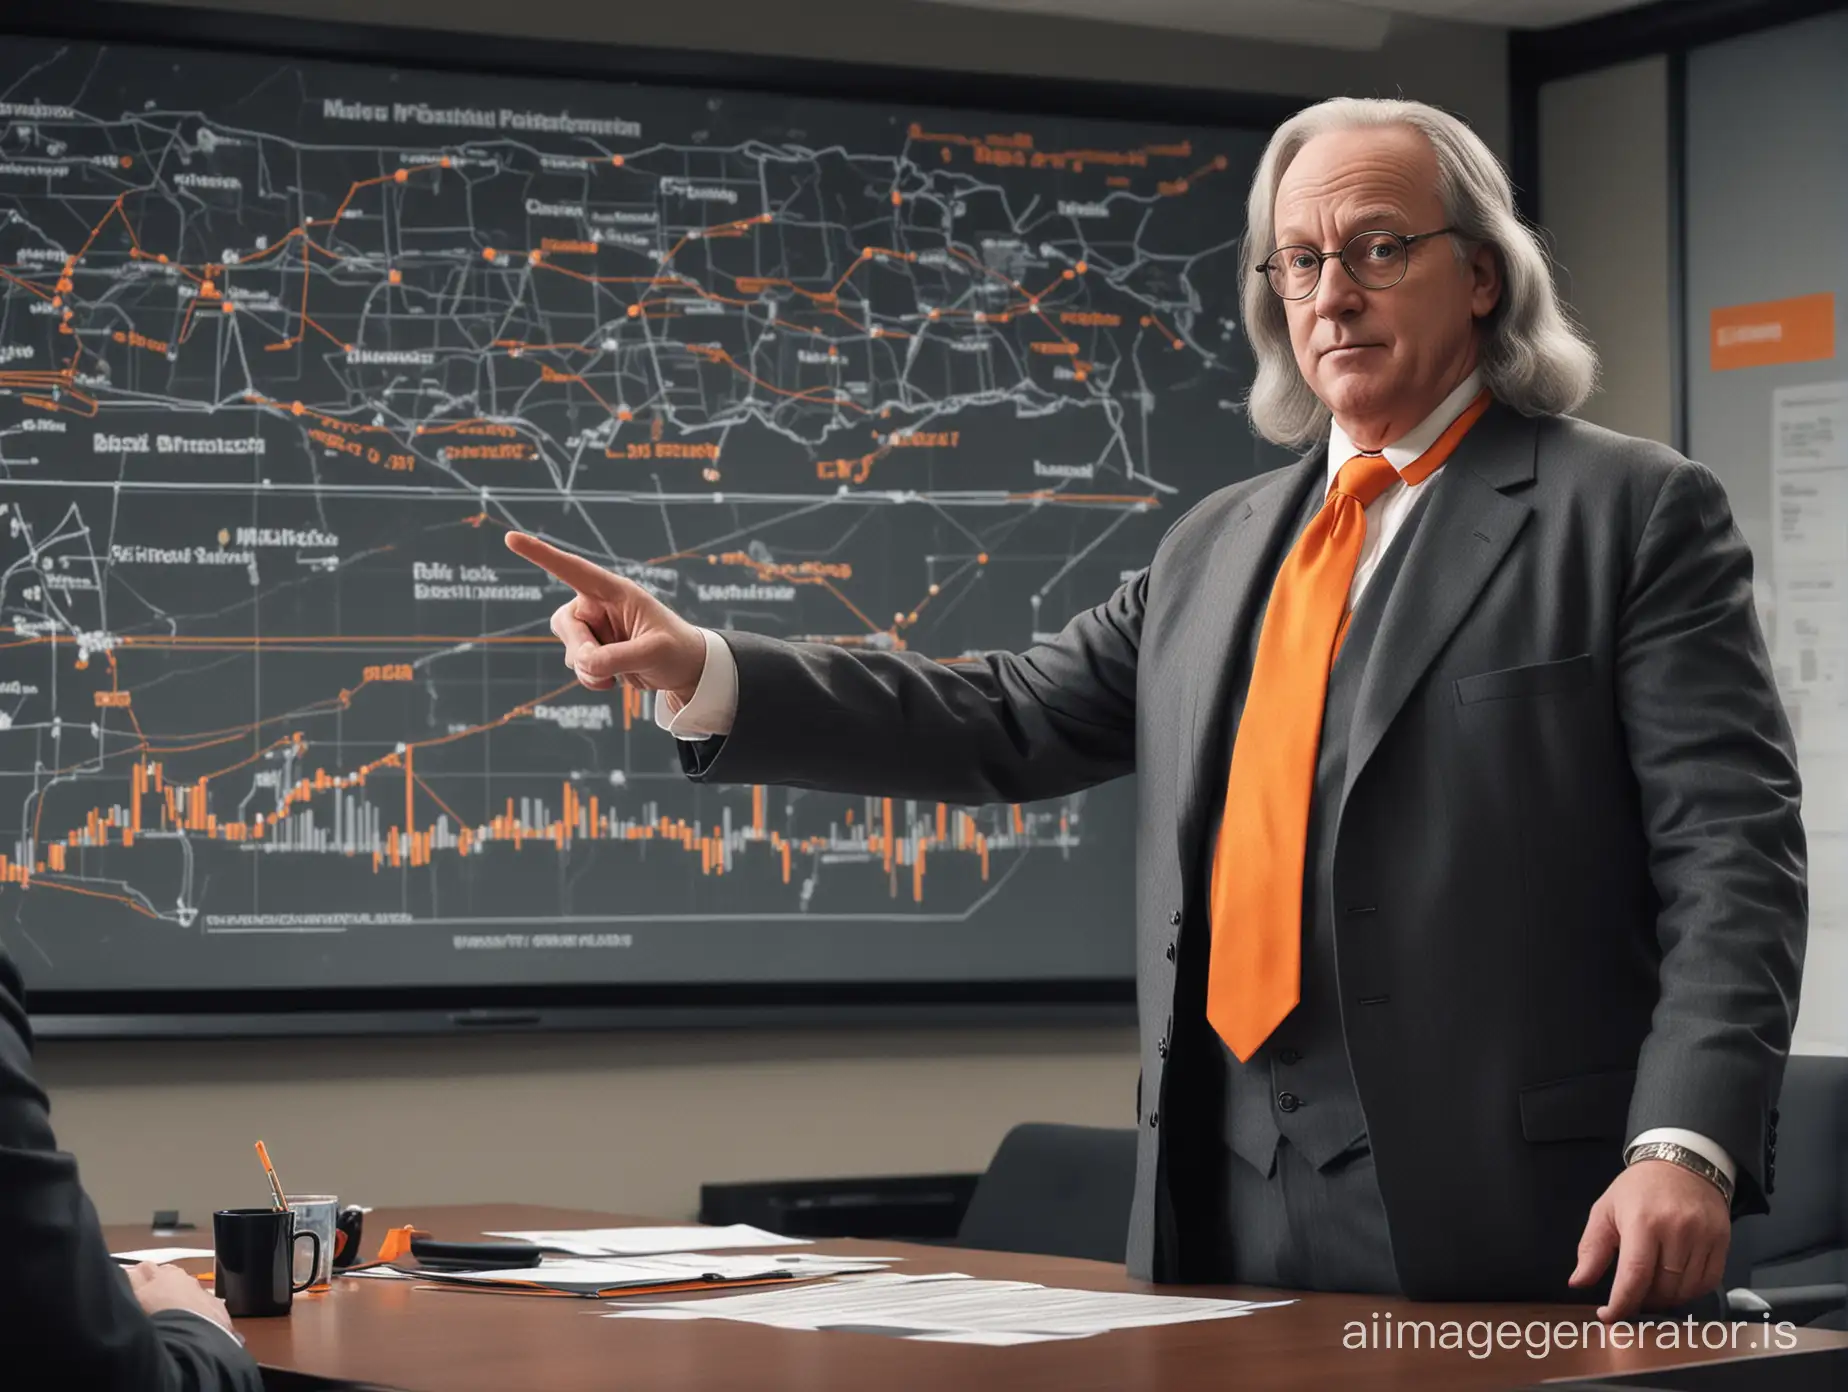 Ben Franklin, distant perspective, shoulder length gray hair, glasses, dark gray business suit, orange tie, modern conference room with other people, pointing to analytics with orange and gray graphics